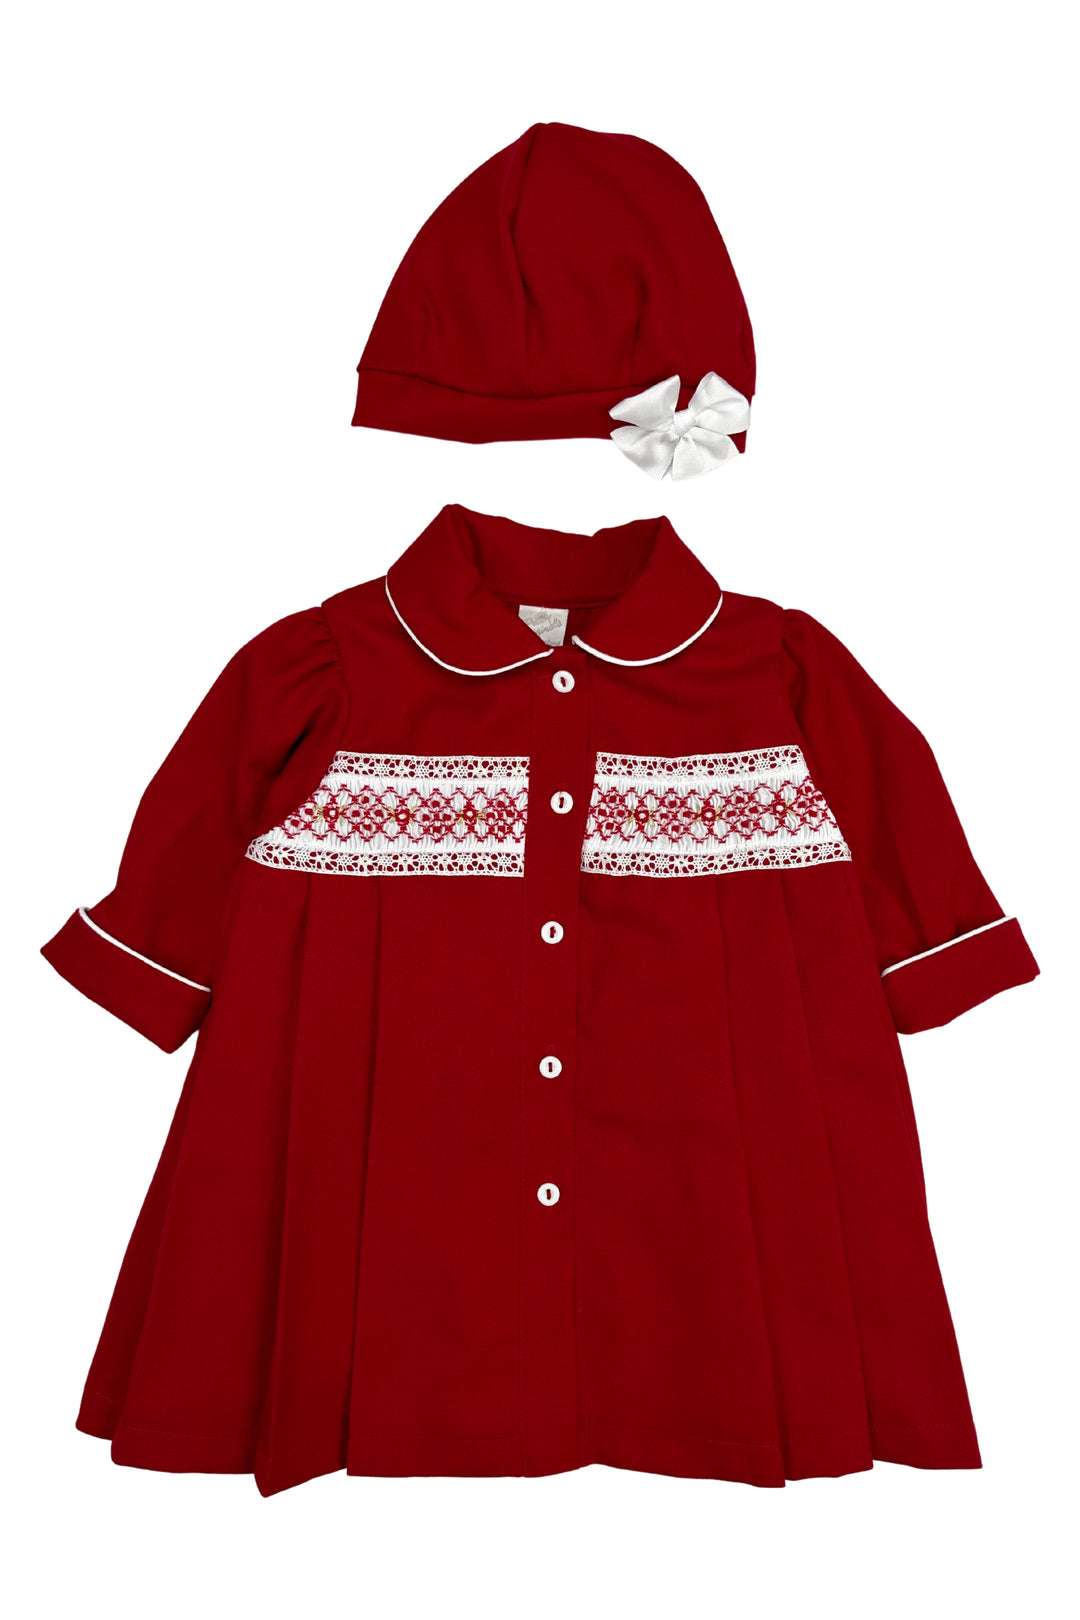 Pretty Originals "Gabrielle" Red Smocked Coat & Hat | iphoneandroidapplications